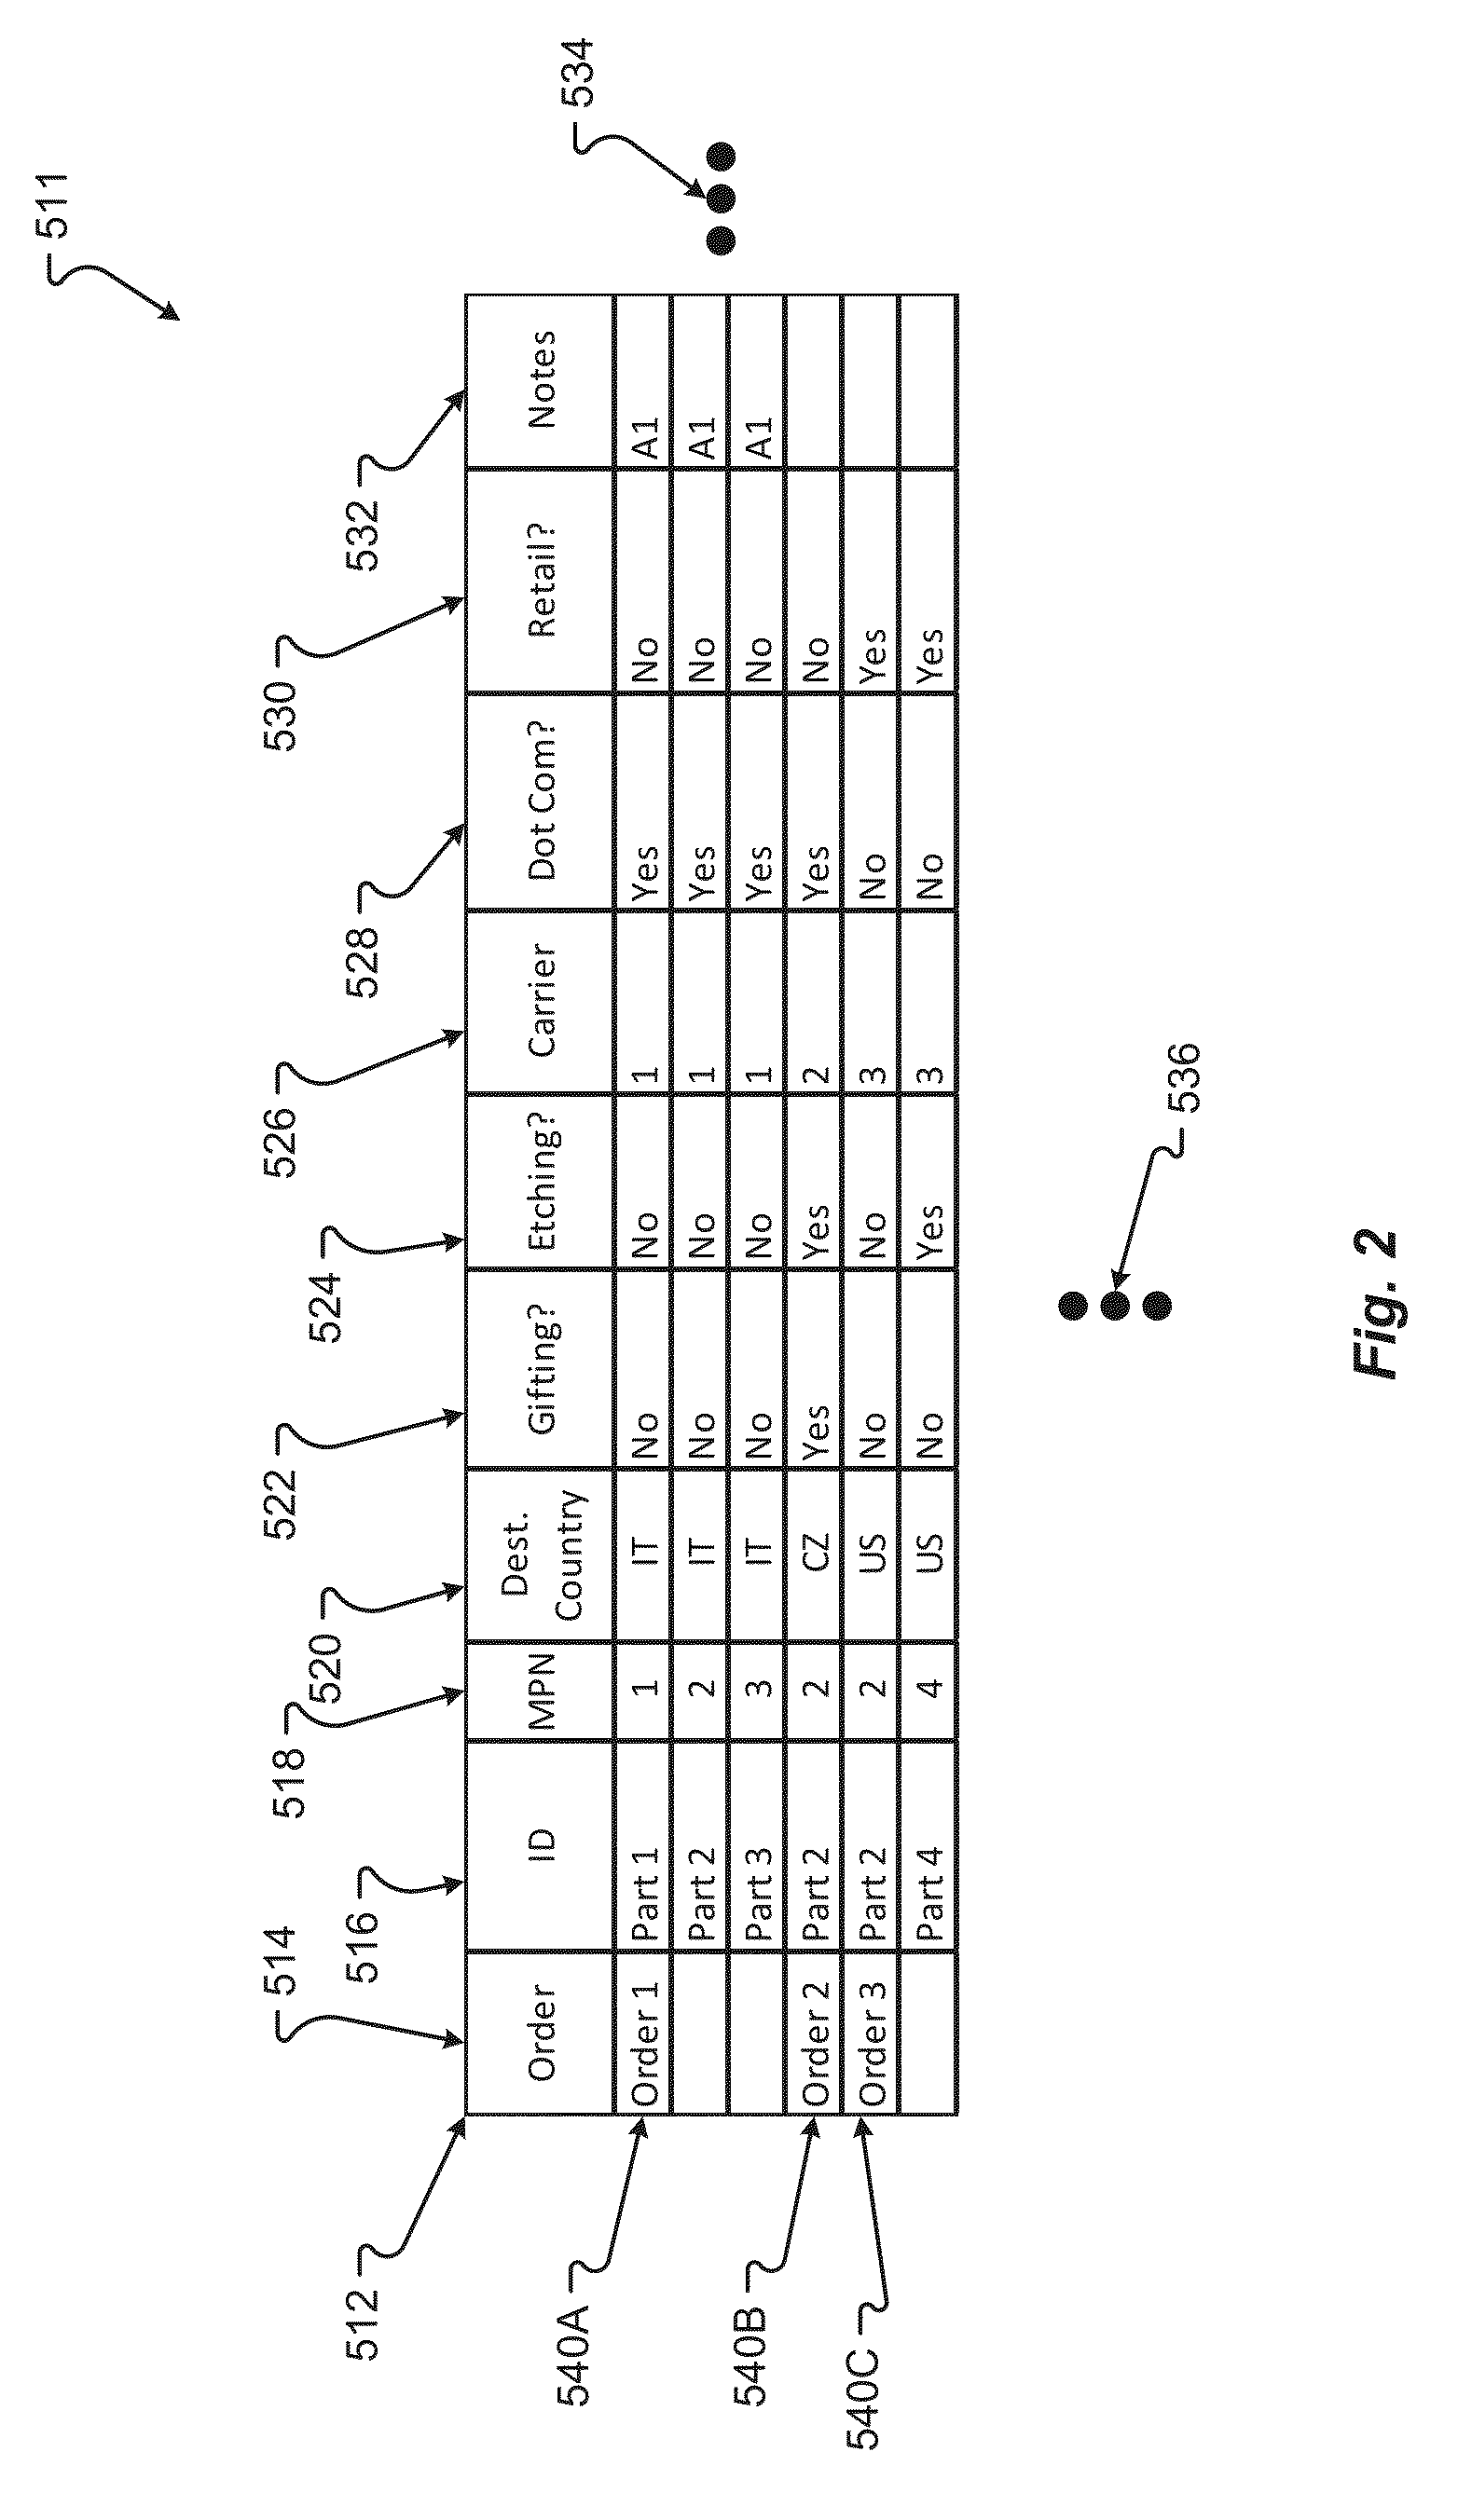 Method and system for order fulfillment